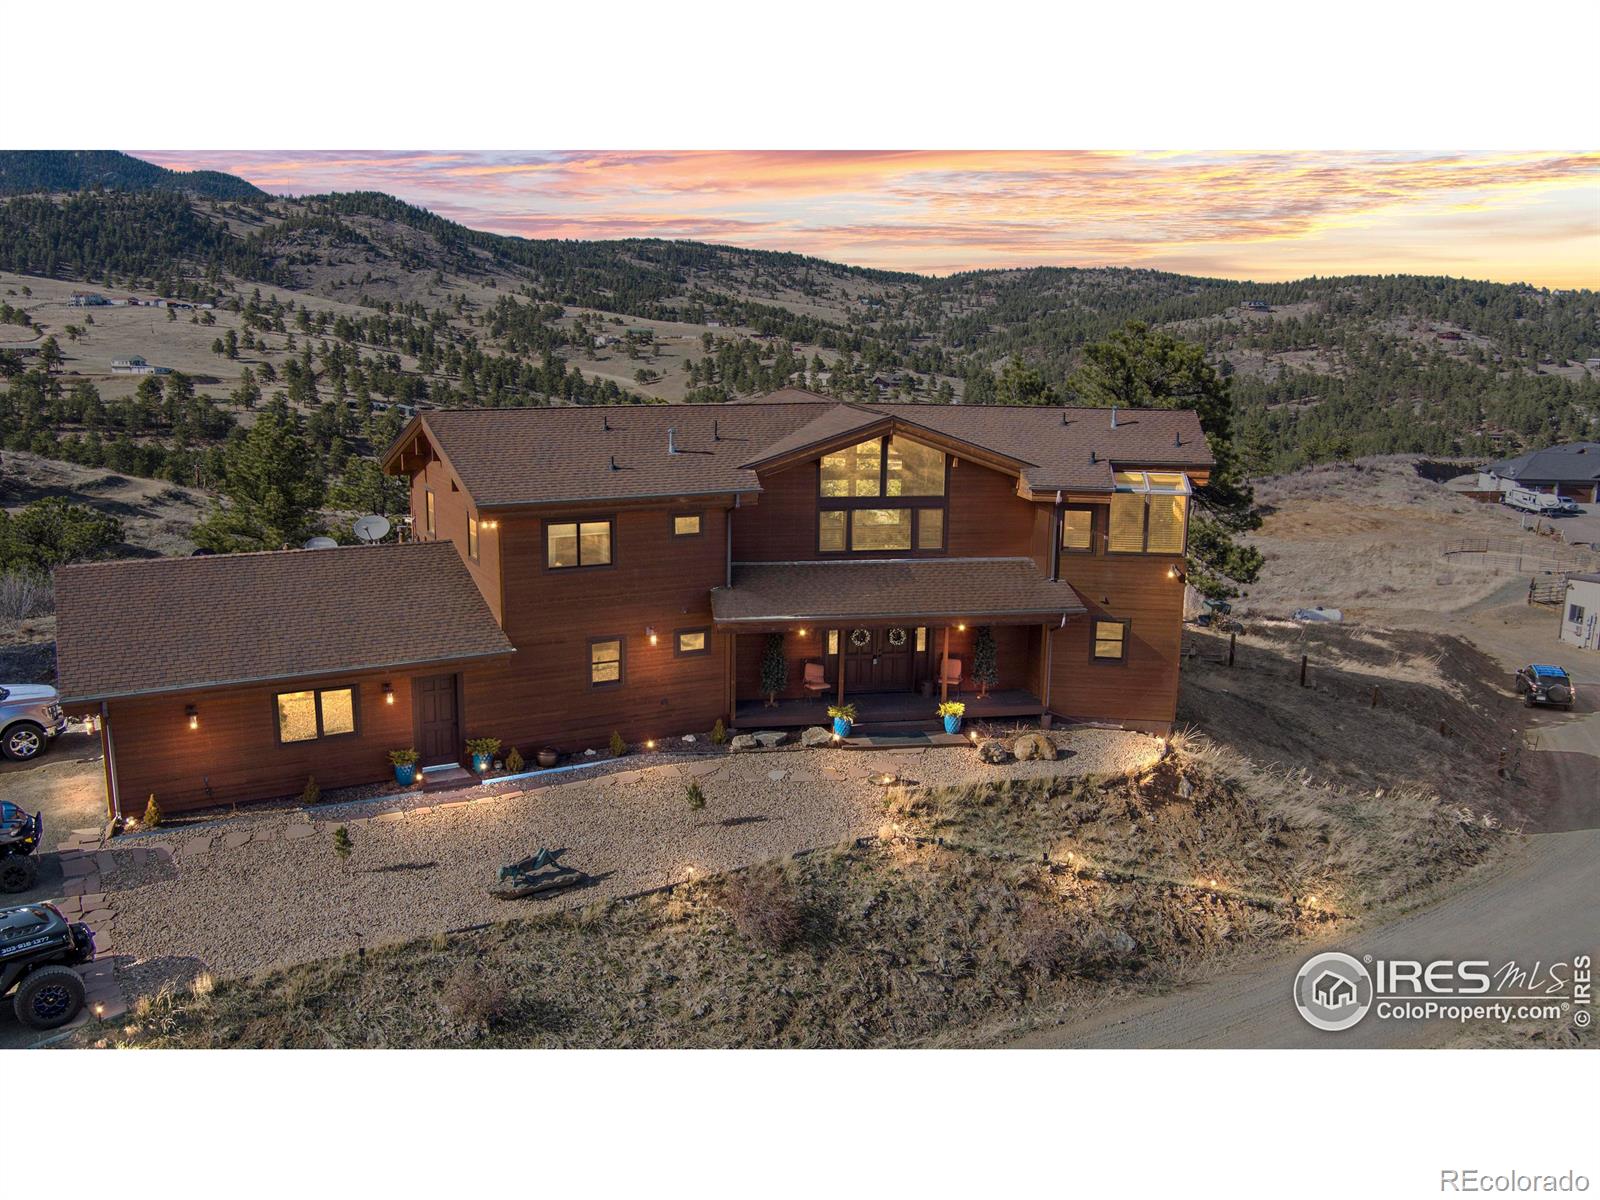 4528  Sheep Patch Road, golden MLS: 456789985592 Beds: 3 Baths: 5 Price: $1,900,000